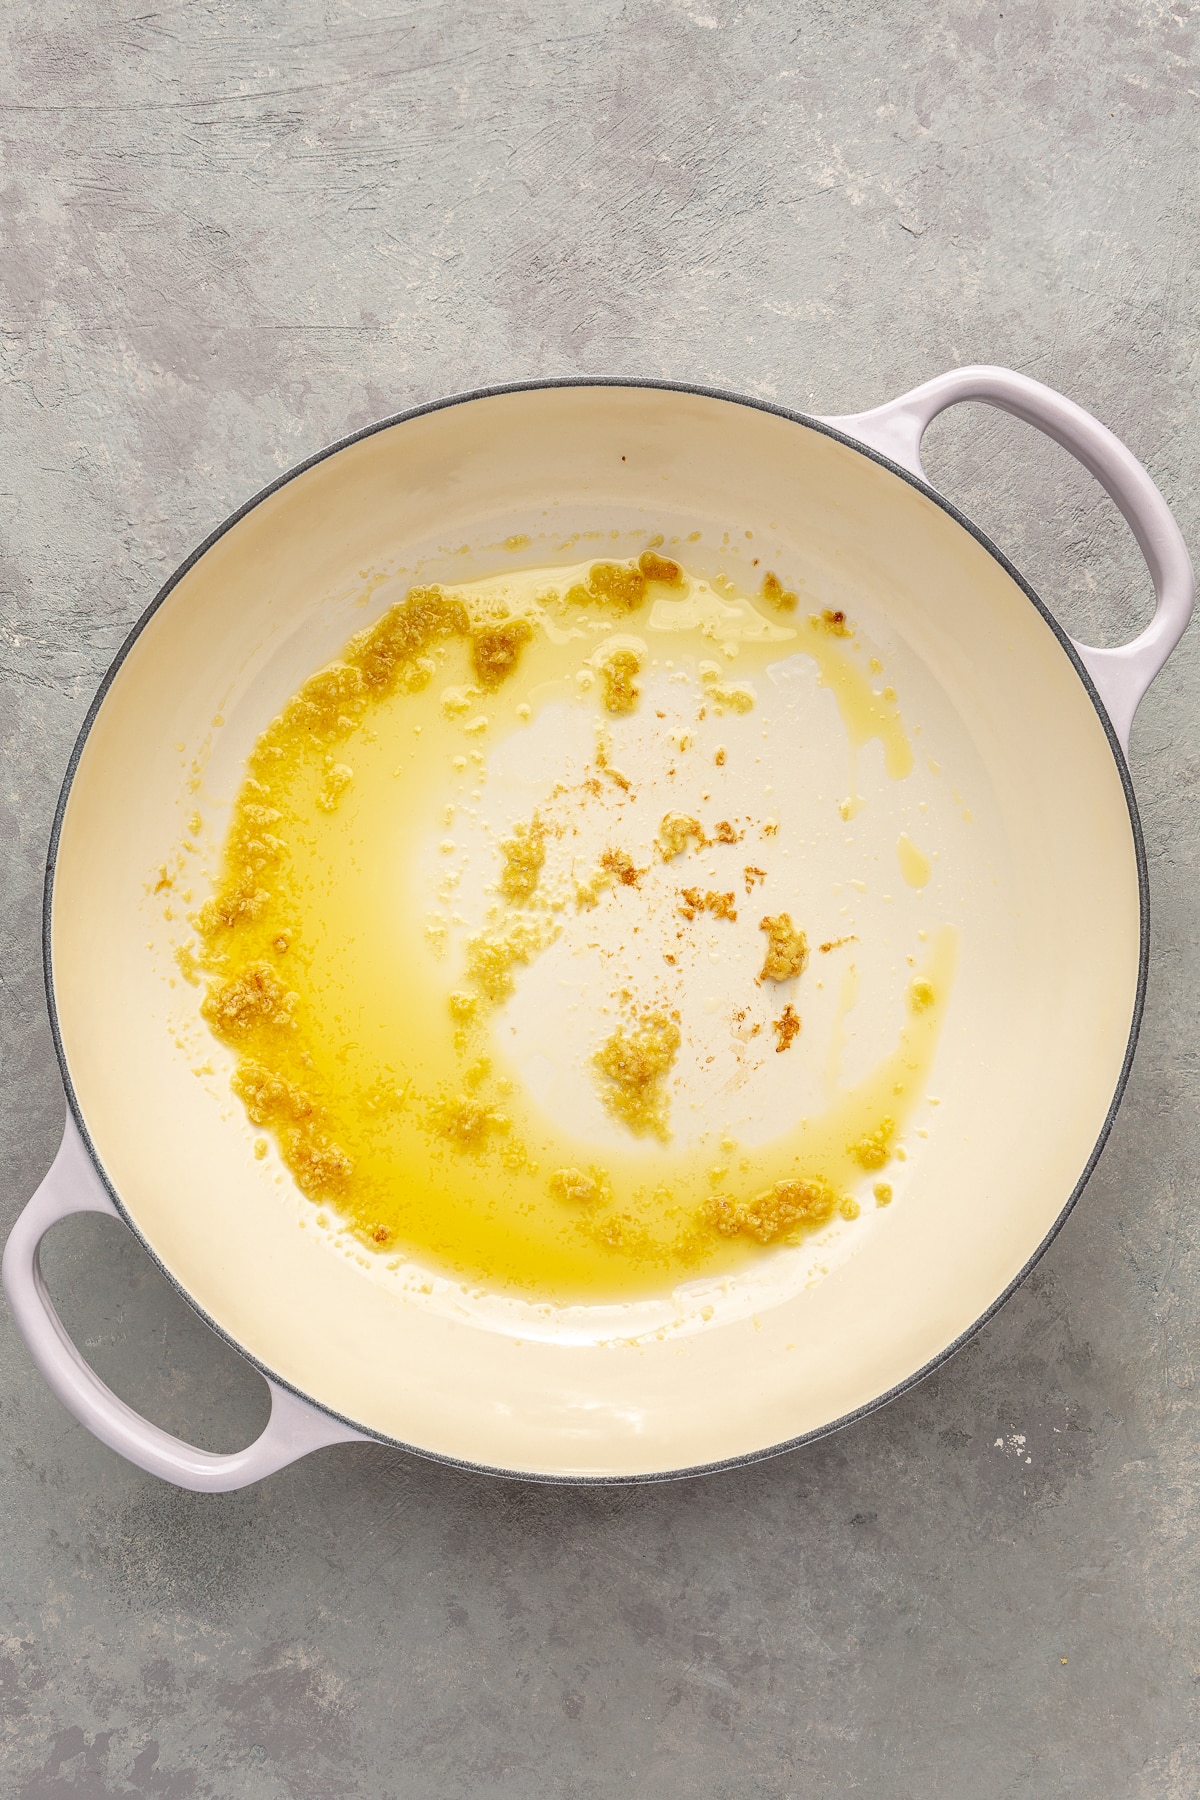 Ghee and minced garlic have been added to a white enameled pot. The ghee has been melted and the minced garlic lightly toasted to a golden brown.